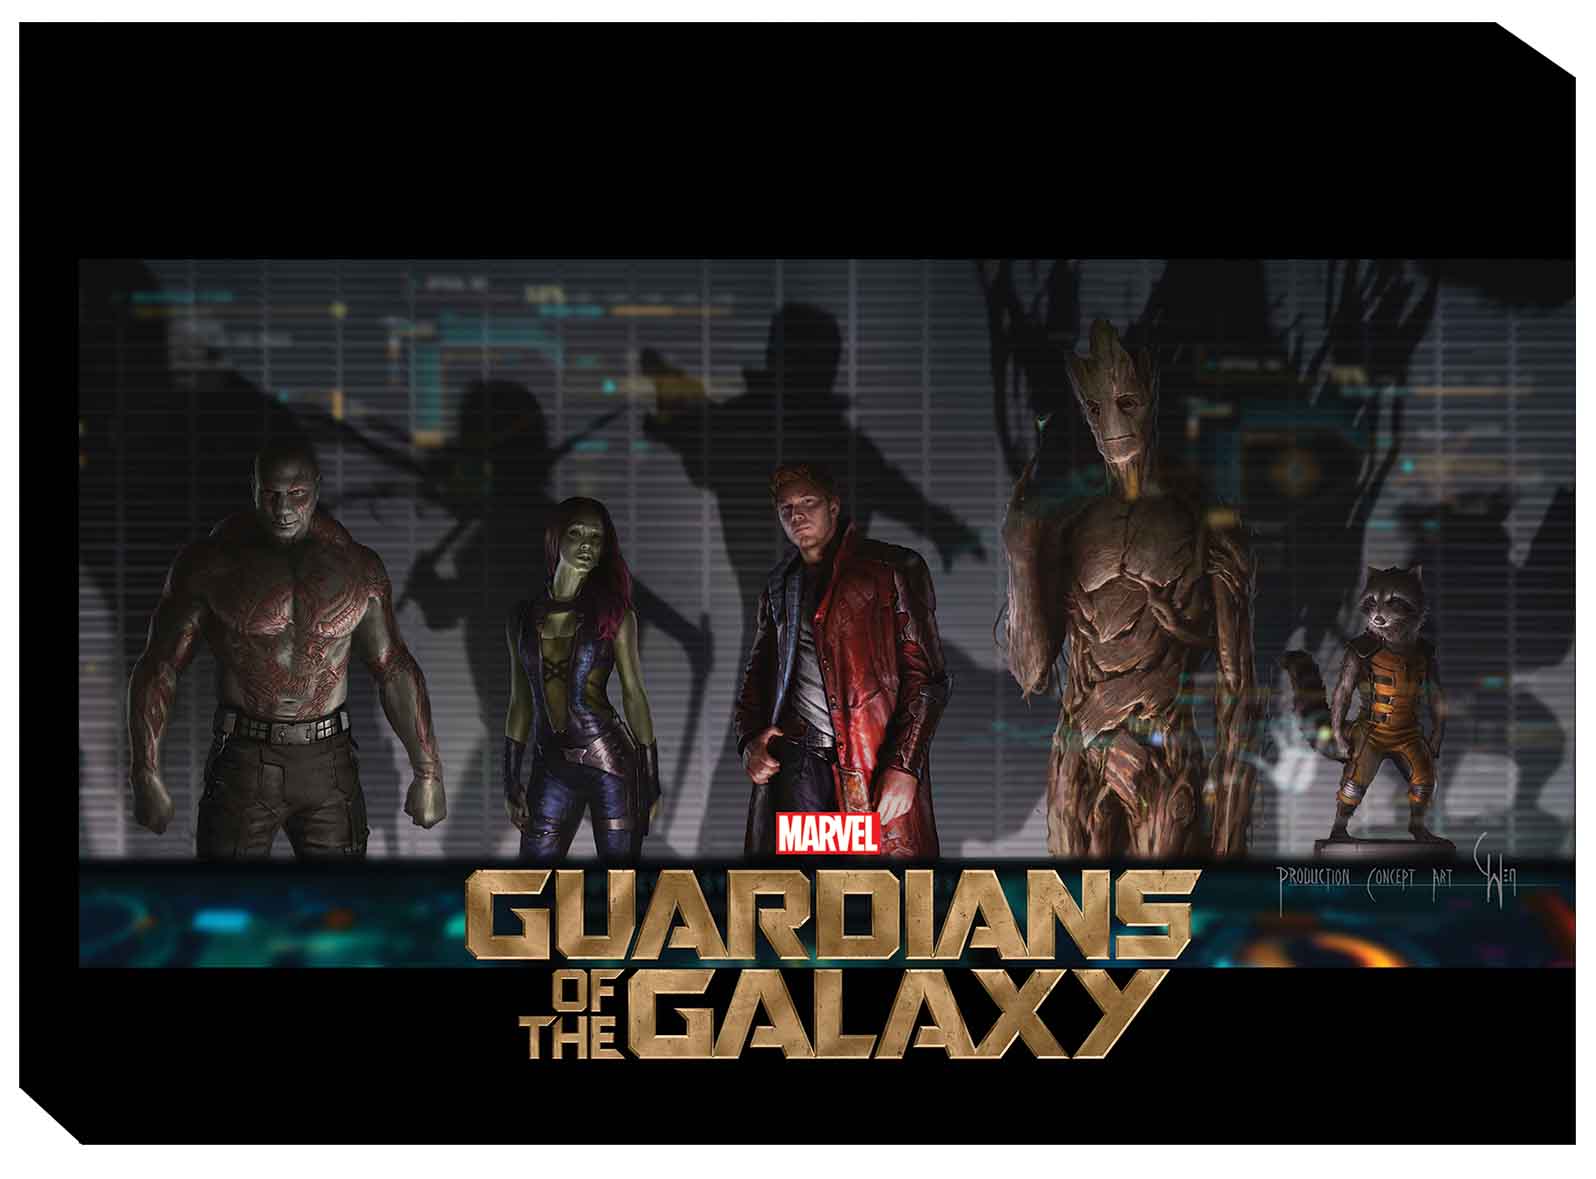 Marvel's Guardians of the Galaxy: The Art of the Movie (Hardcover)